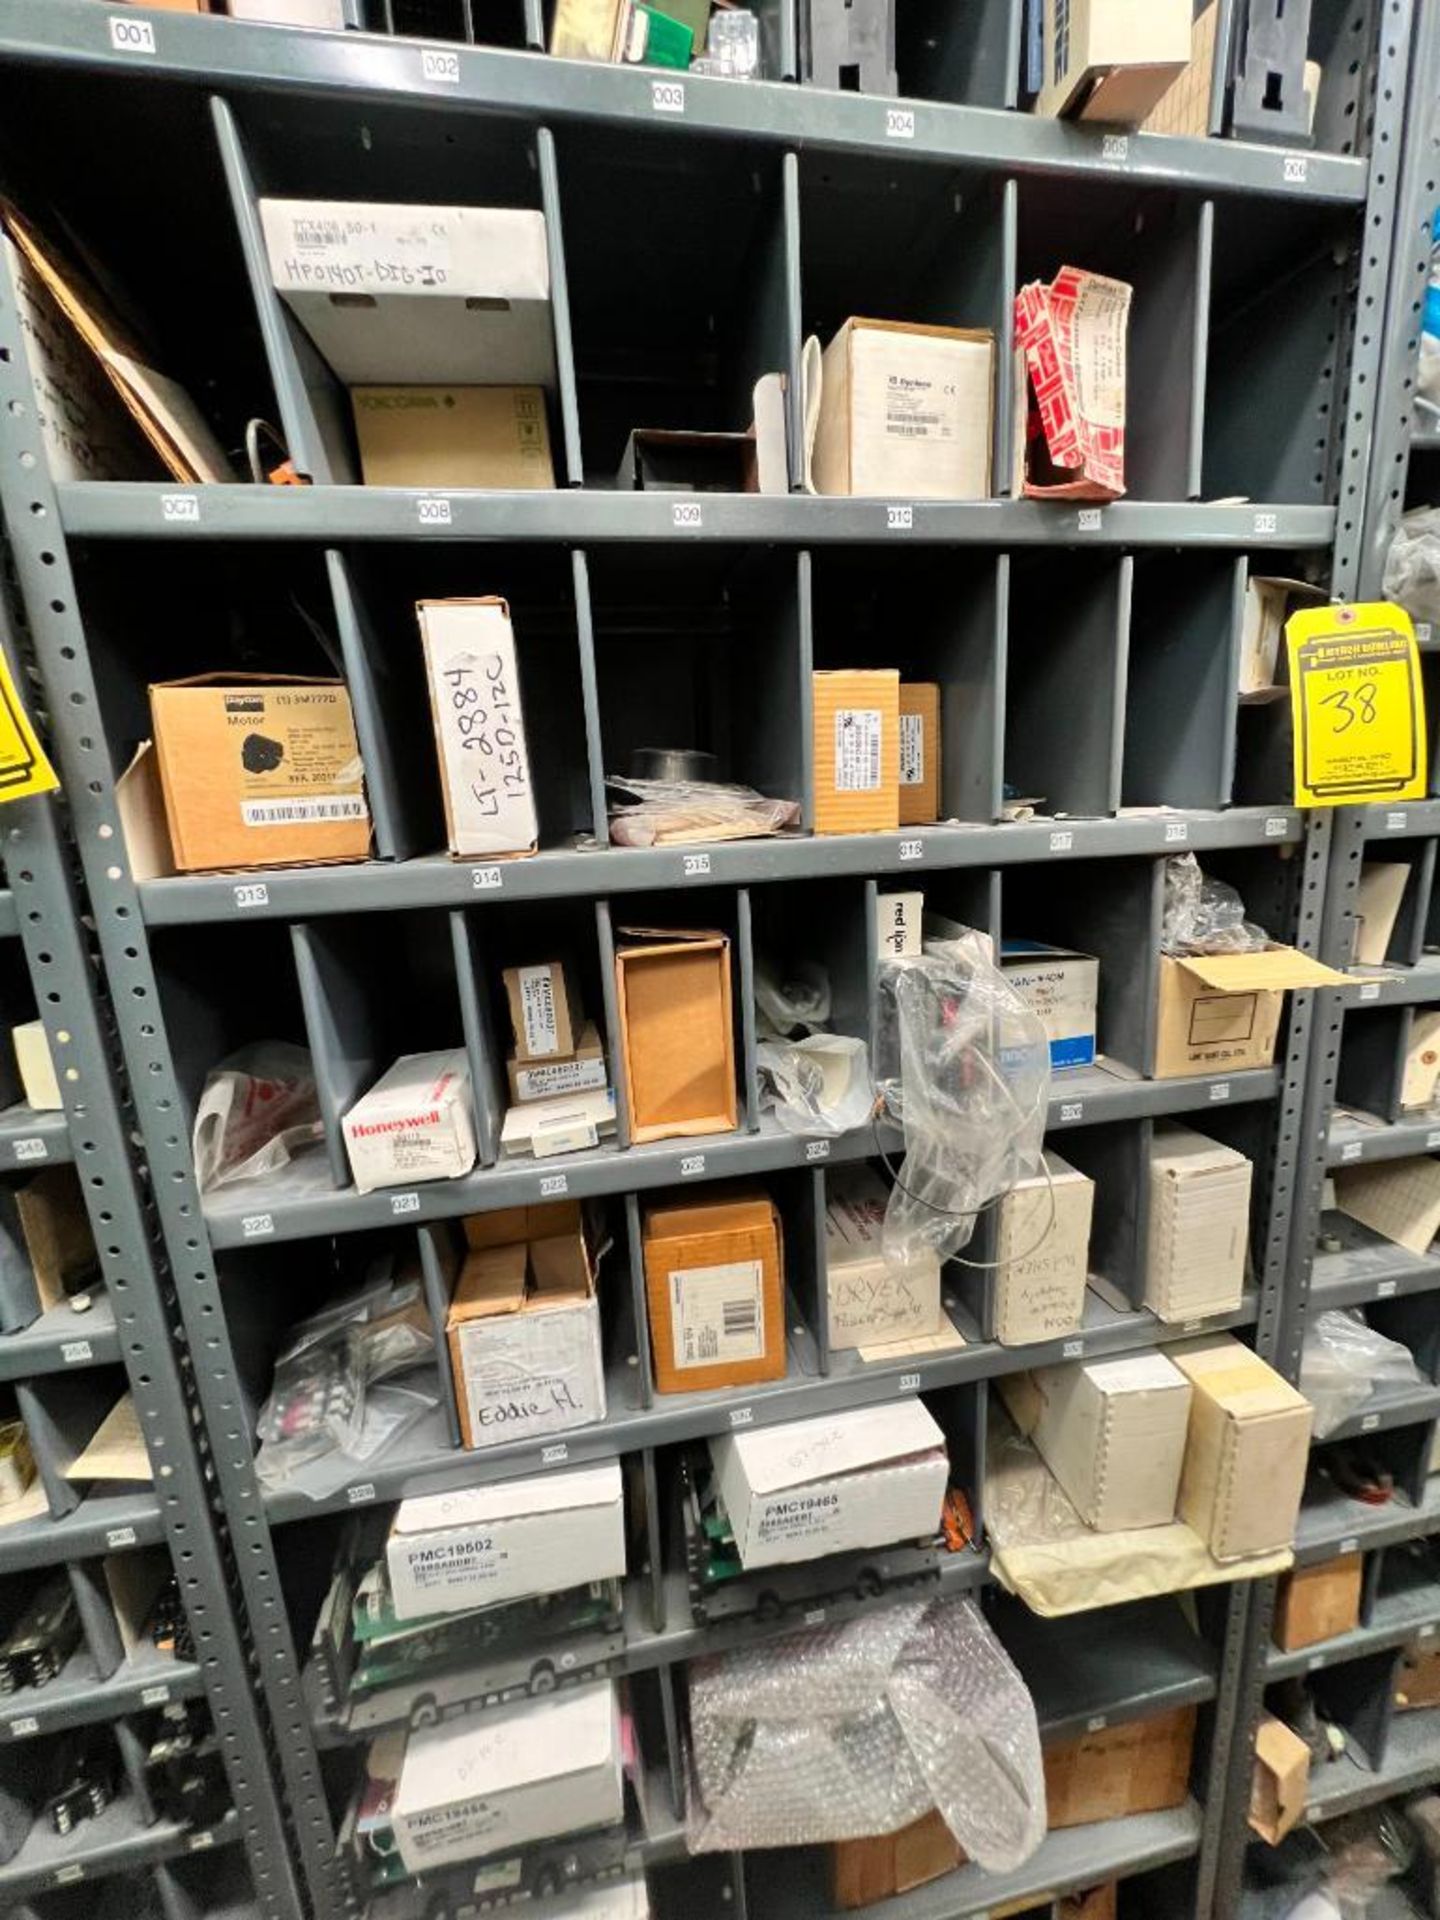 (28) Shelves of Assorted Parts, VERY LARGE LOT Consisting of MRO, Drives, Valves, PLC, Nuts, Bolts, - Image 42 of 67